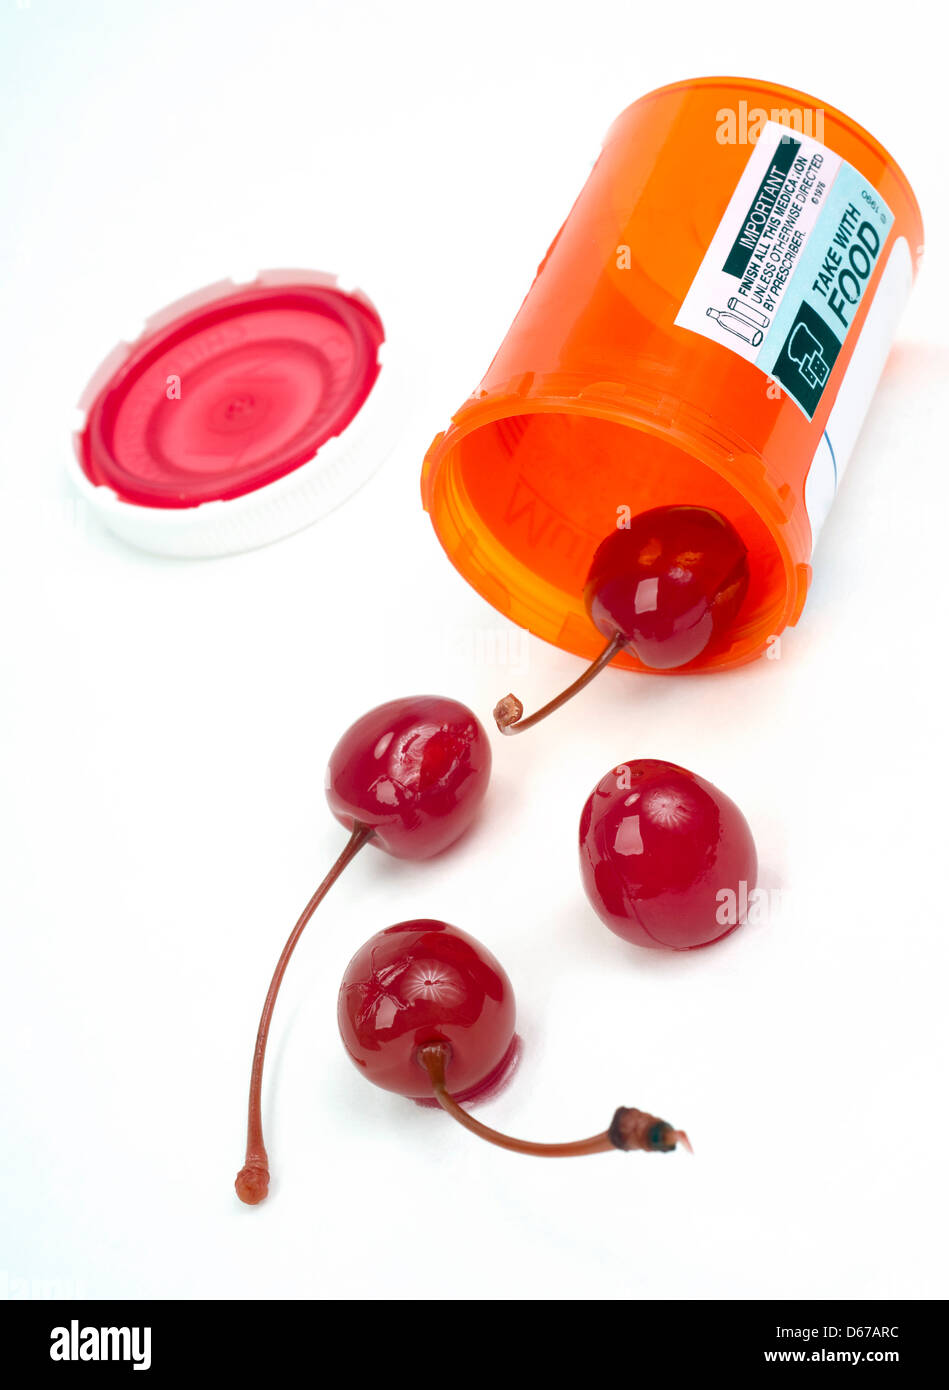 4 Red Cherries Roll out of Pharmacy Medicine Container Stock Photo